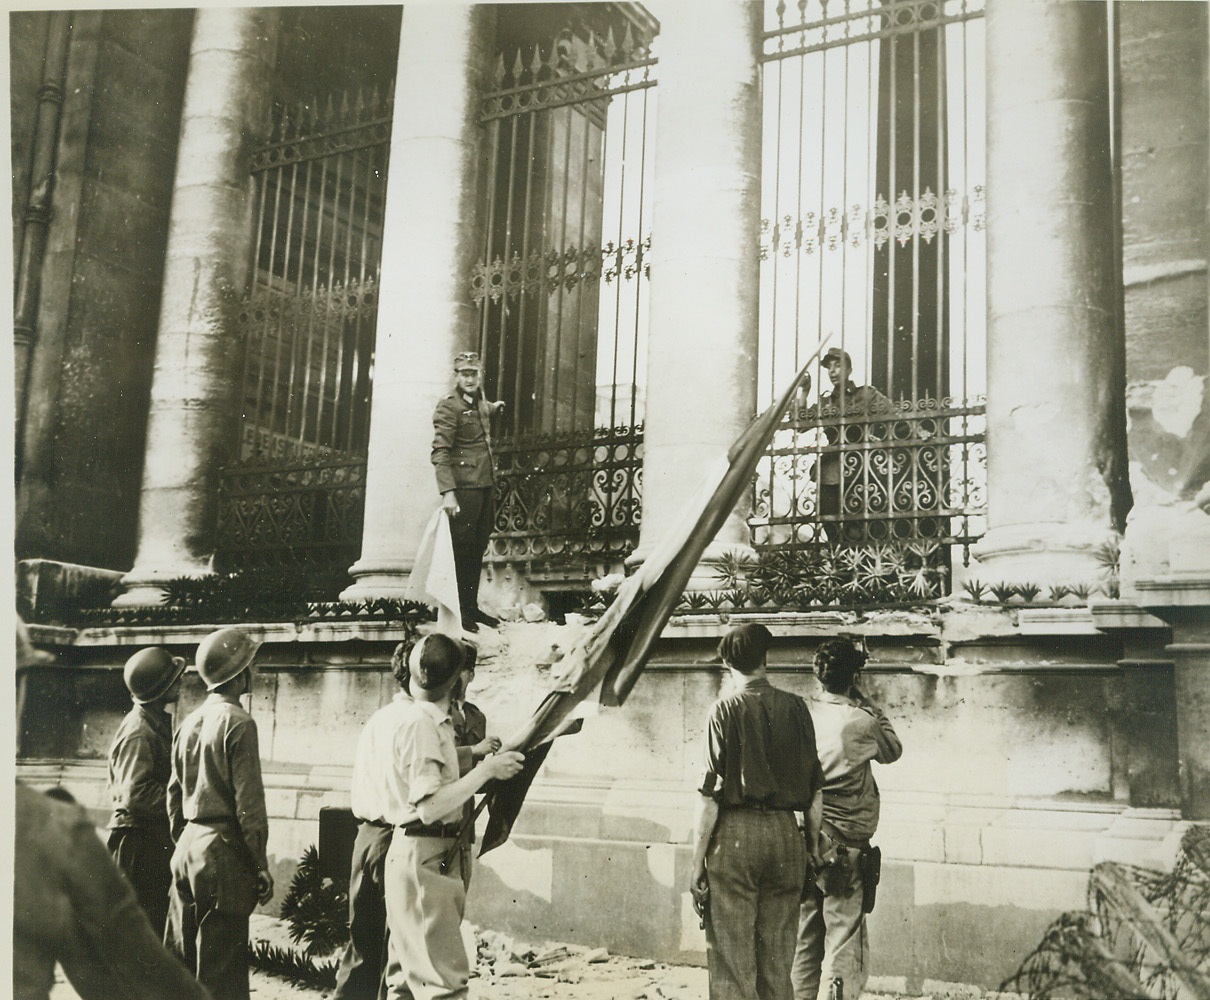 France Regains Its Chamber of Deputies, 8/30/1944. France—With a Nazi garrison barricaded behind him, a German officer hangs onto rail of the Chamber of Deputies in Paris while negotiating for surrender to the French partisans. He holds the white flag of truce while a French soldier in the foreground has the Tricolor ready to hoist as a signal of victory when surrender is complete.  Credit: ACME;